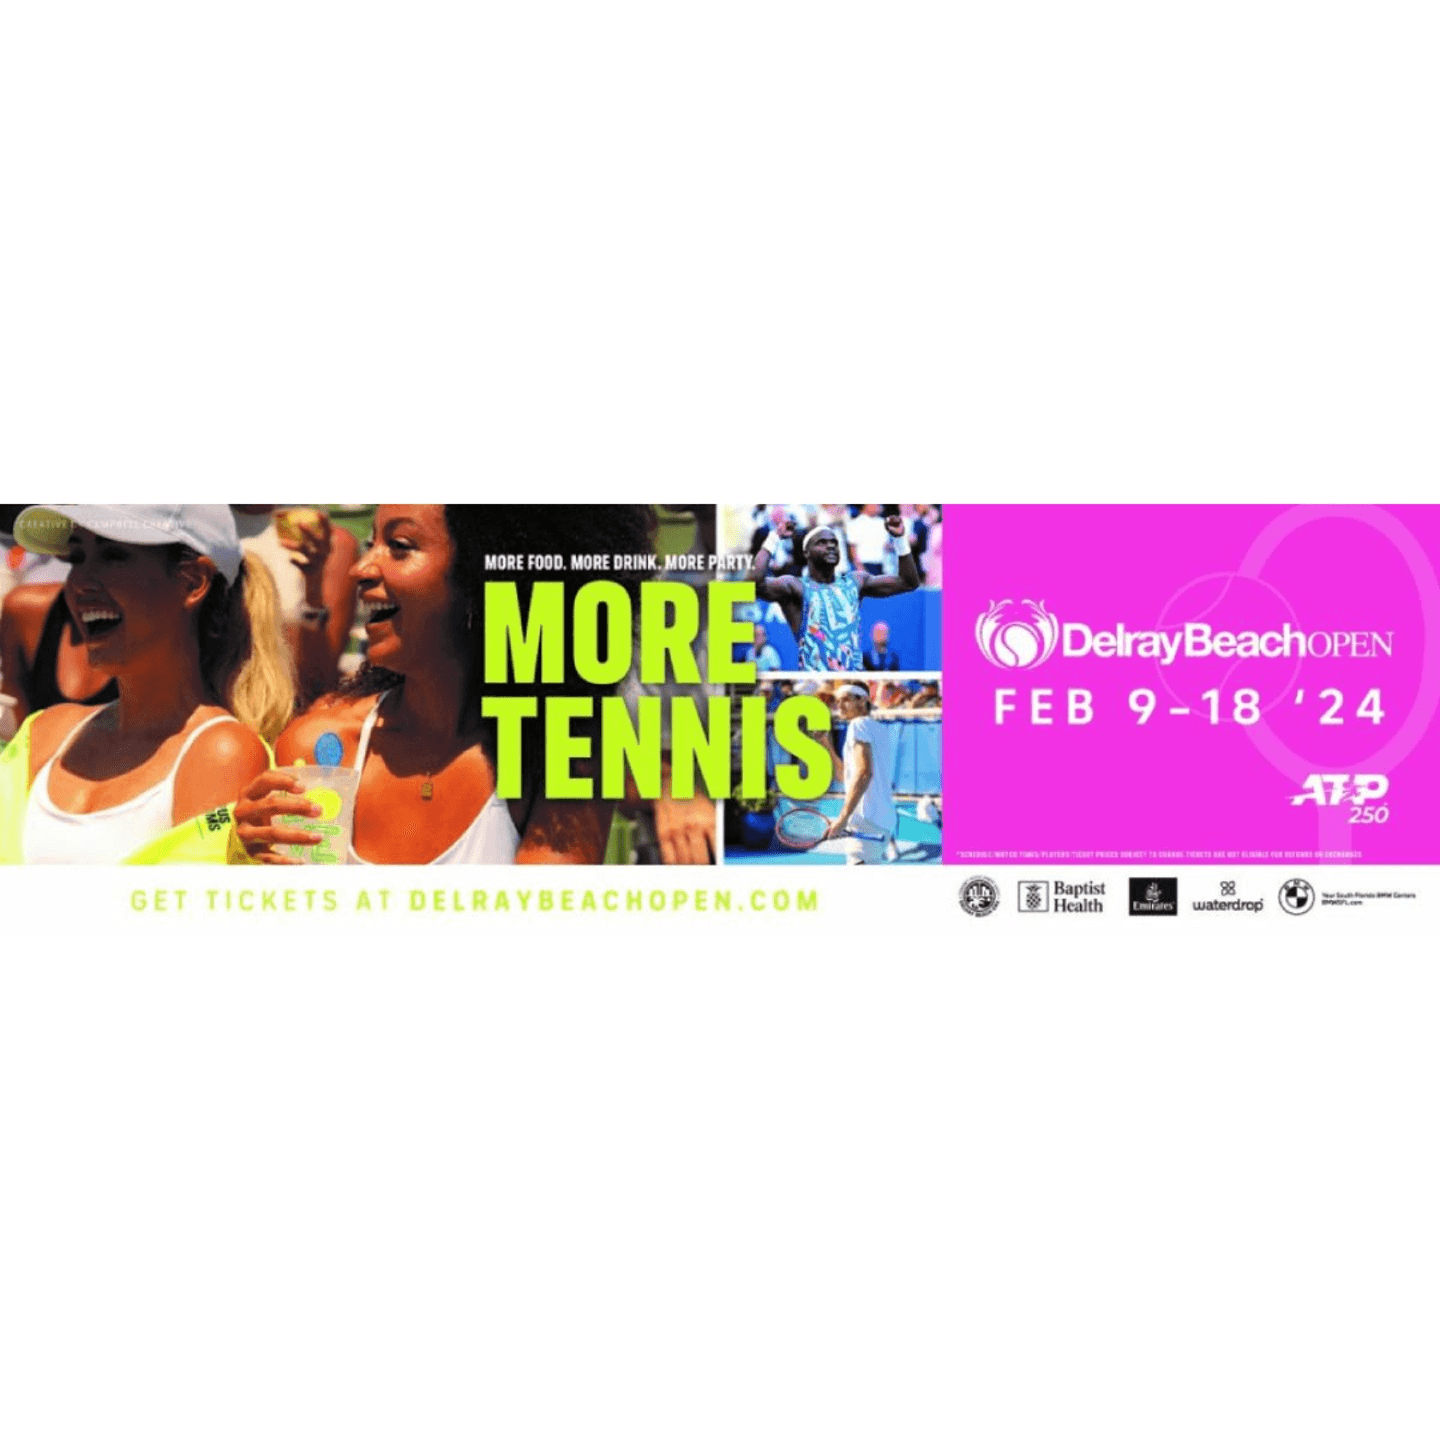 More Food. More Drink. More Party. MORE TENNIS!